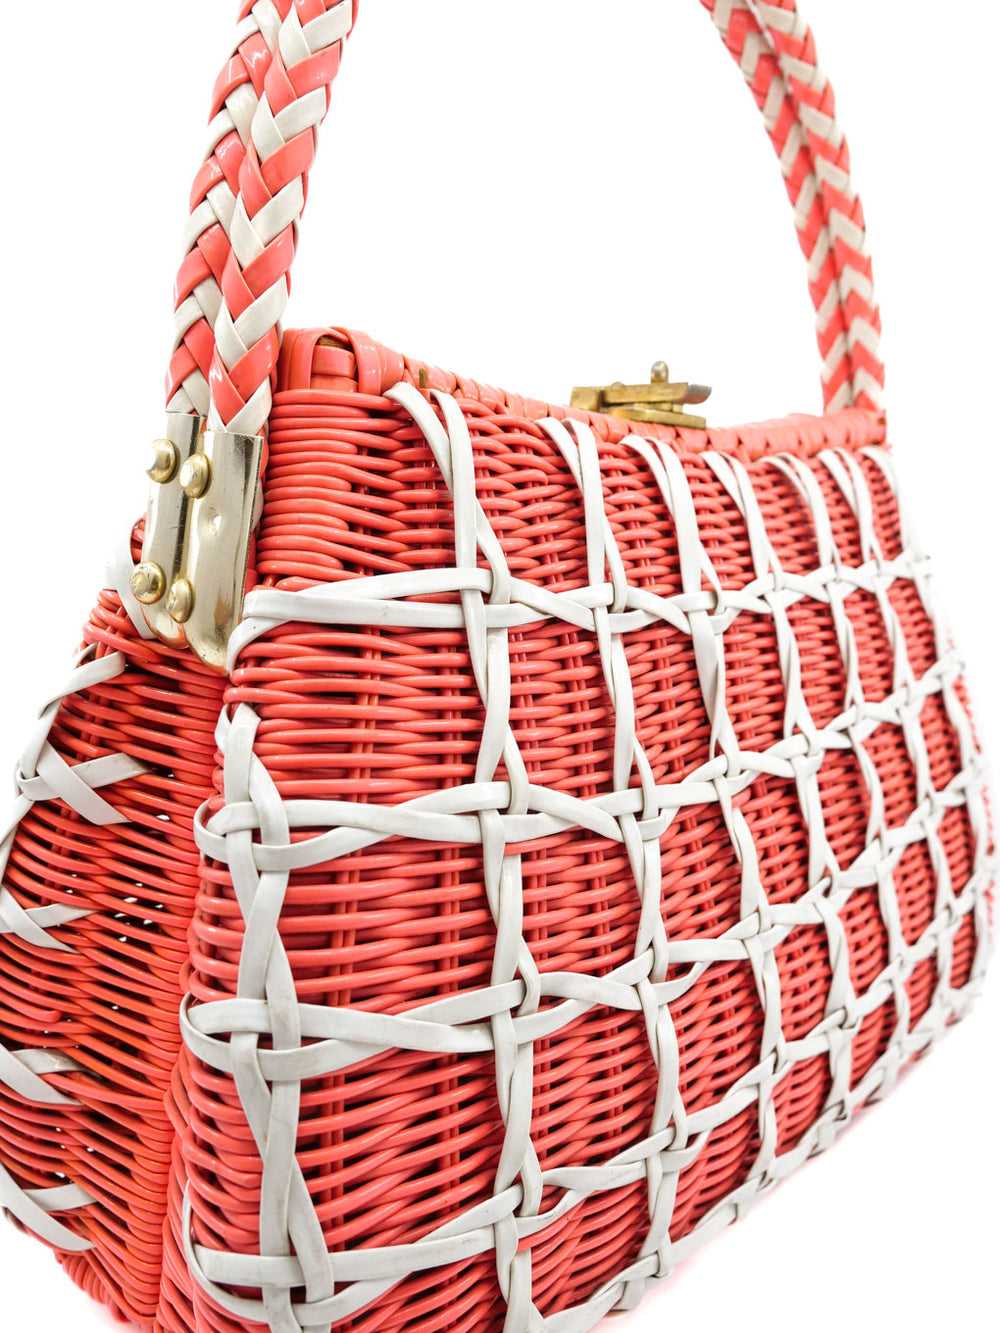 Coral Wicker Woven Basket Bag - image 6